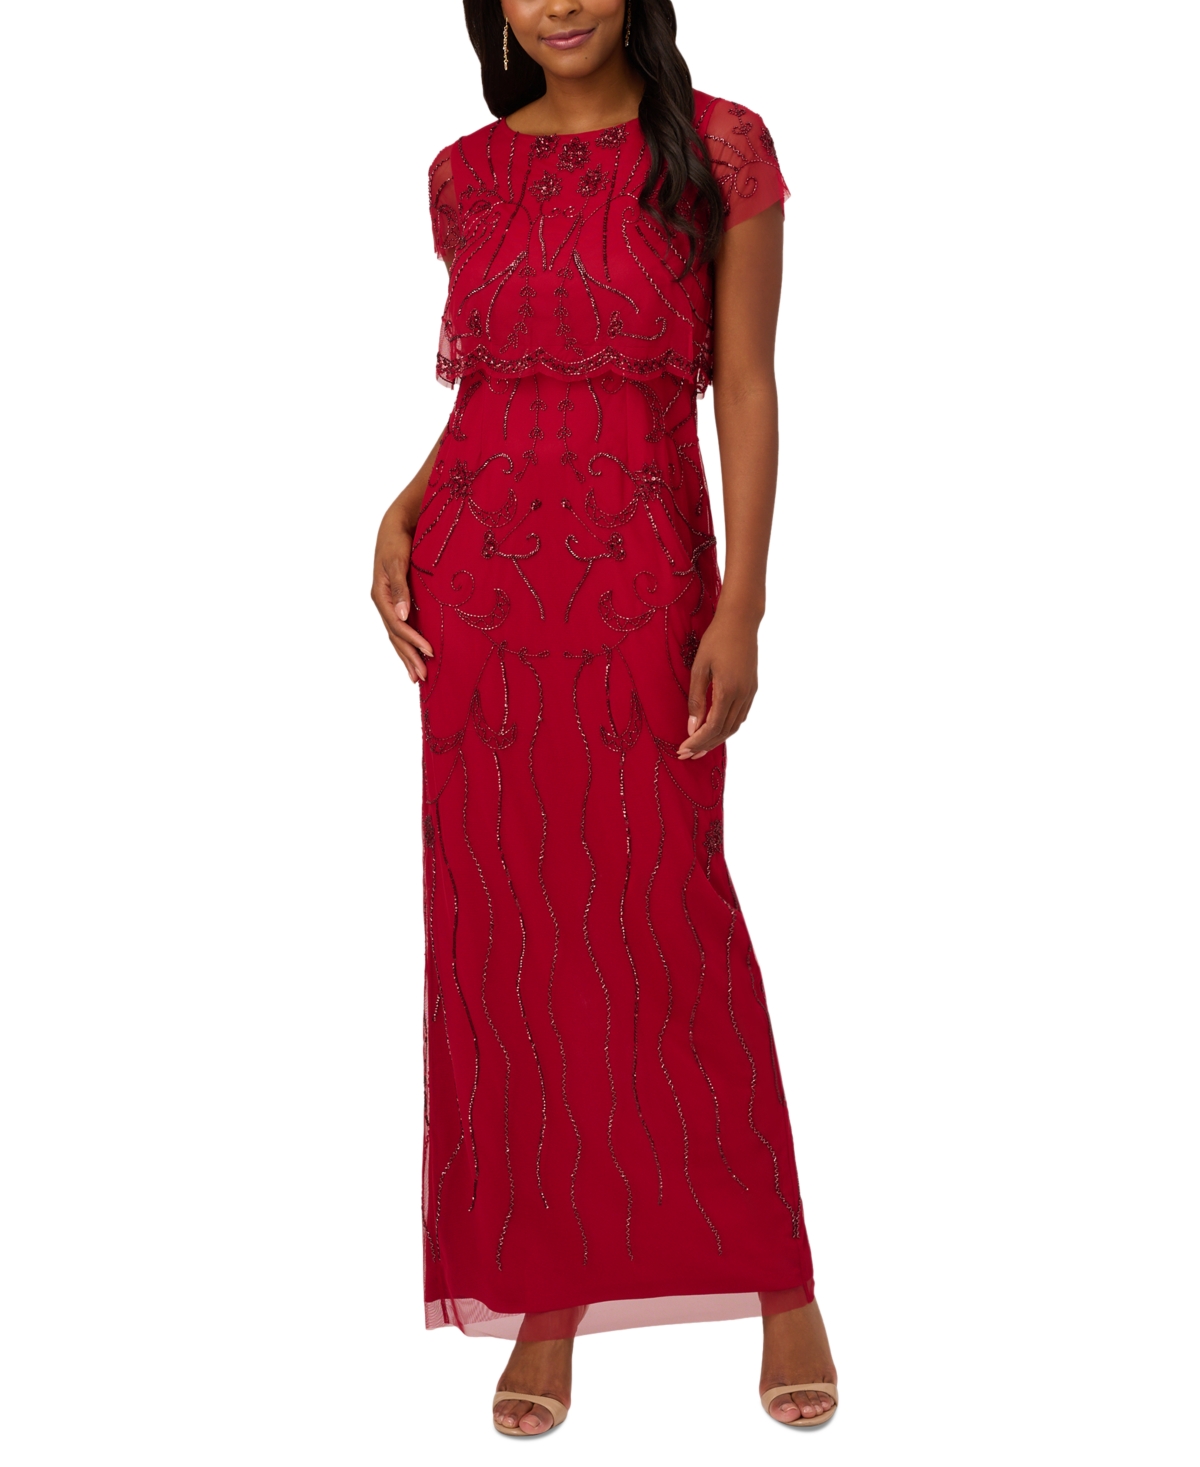 Great Gatsby Dress – Great Gatsby Dresses for Sale Adrianna Papell Petite Beaded Scalloped-Popover Gown - Cranberry $229.00 AT vintagedancer.com